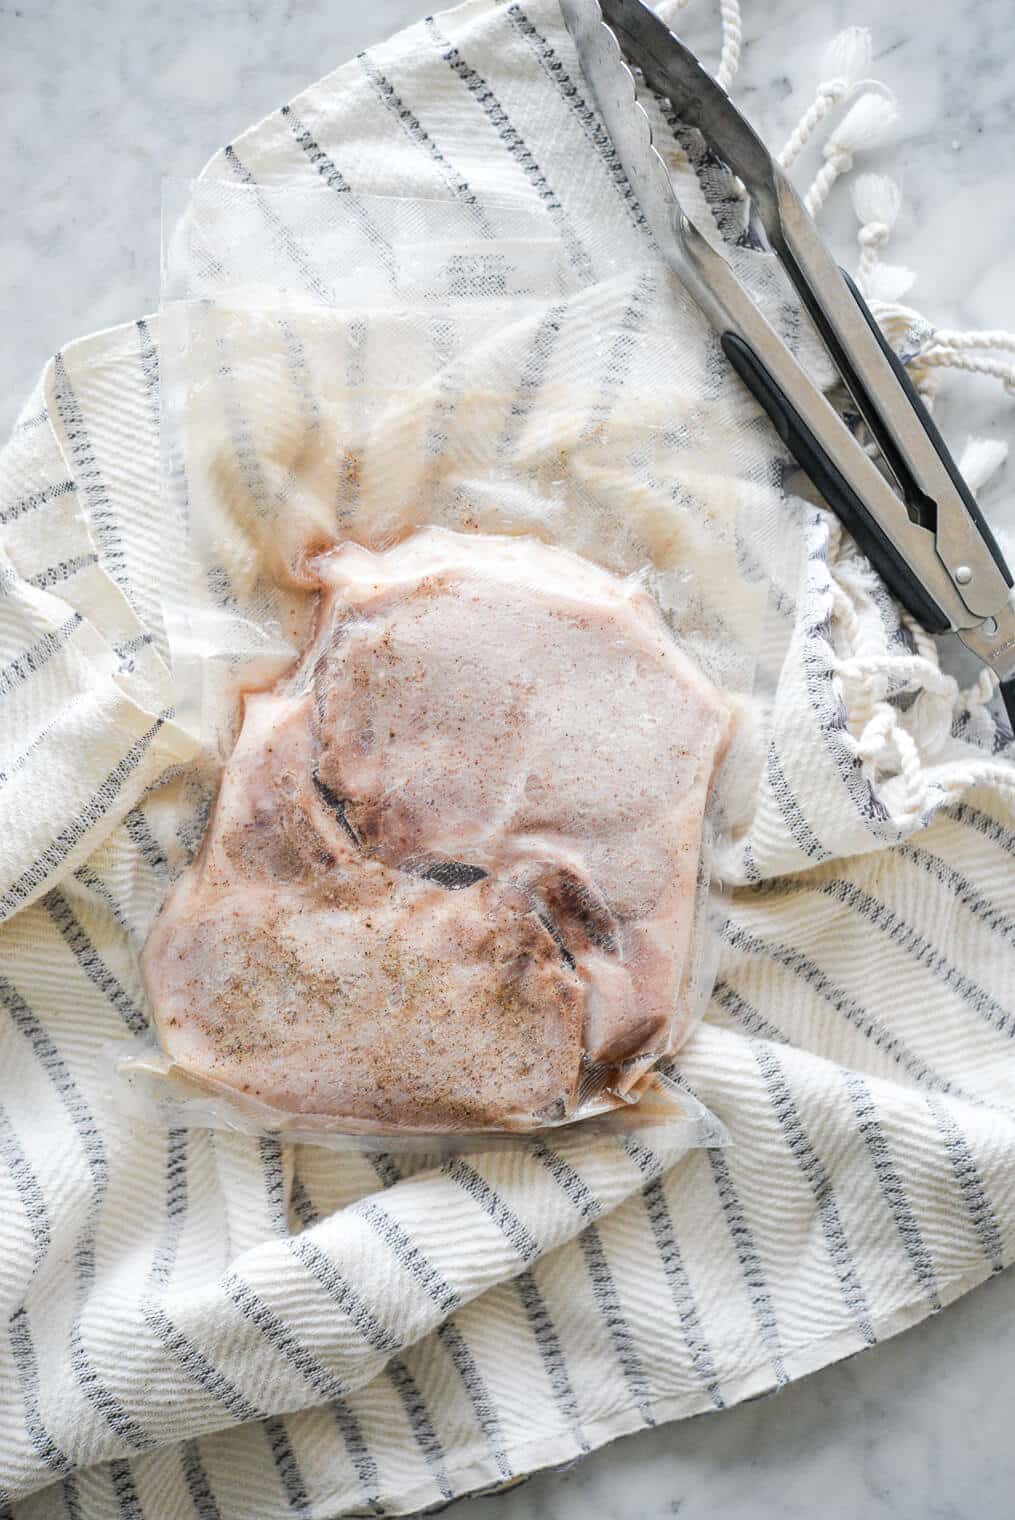 Two cooked, bone-in pork chops in a sous vide bag sitting next to a pair of tongs on top of a white and blue striped towel.